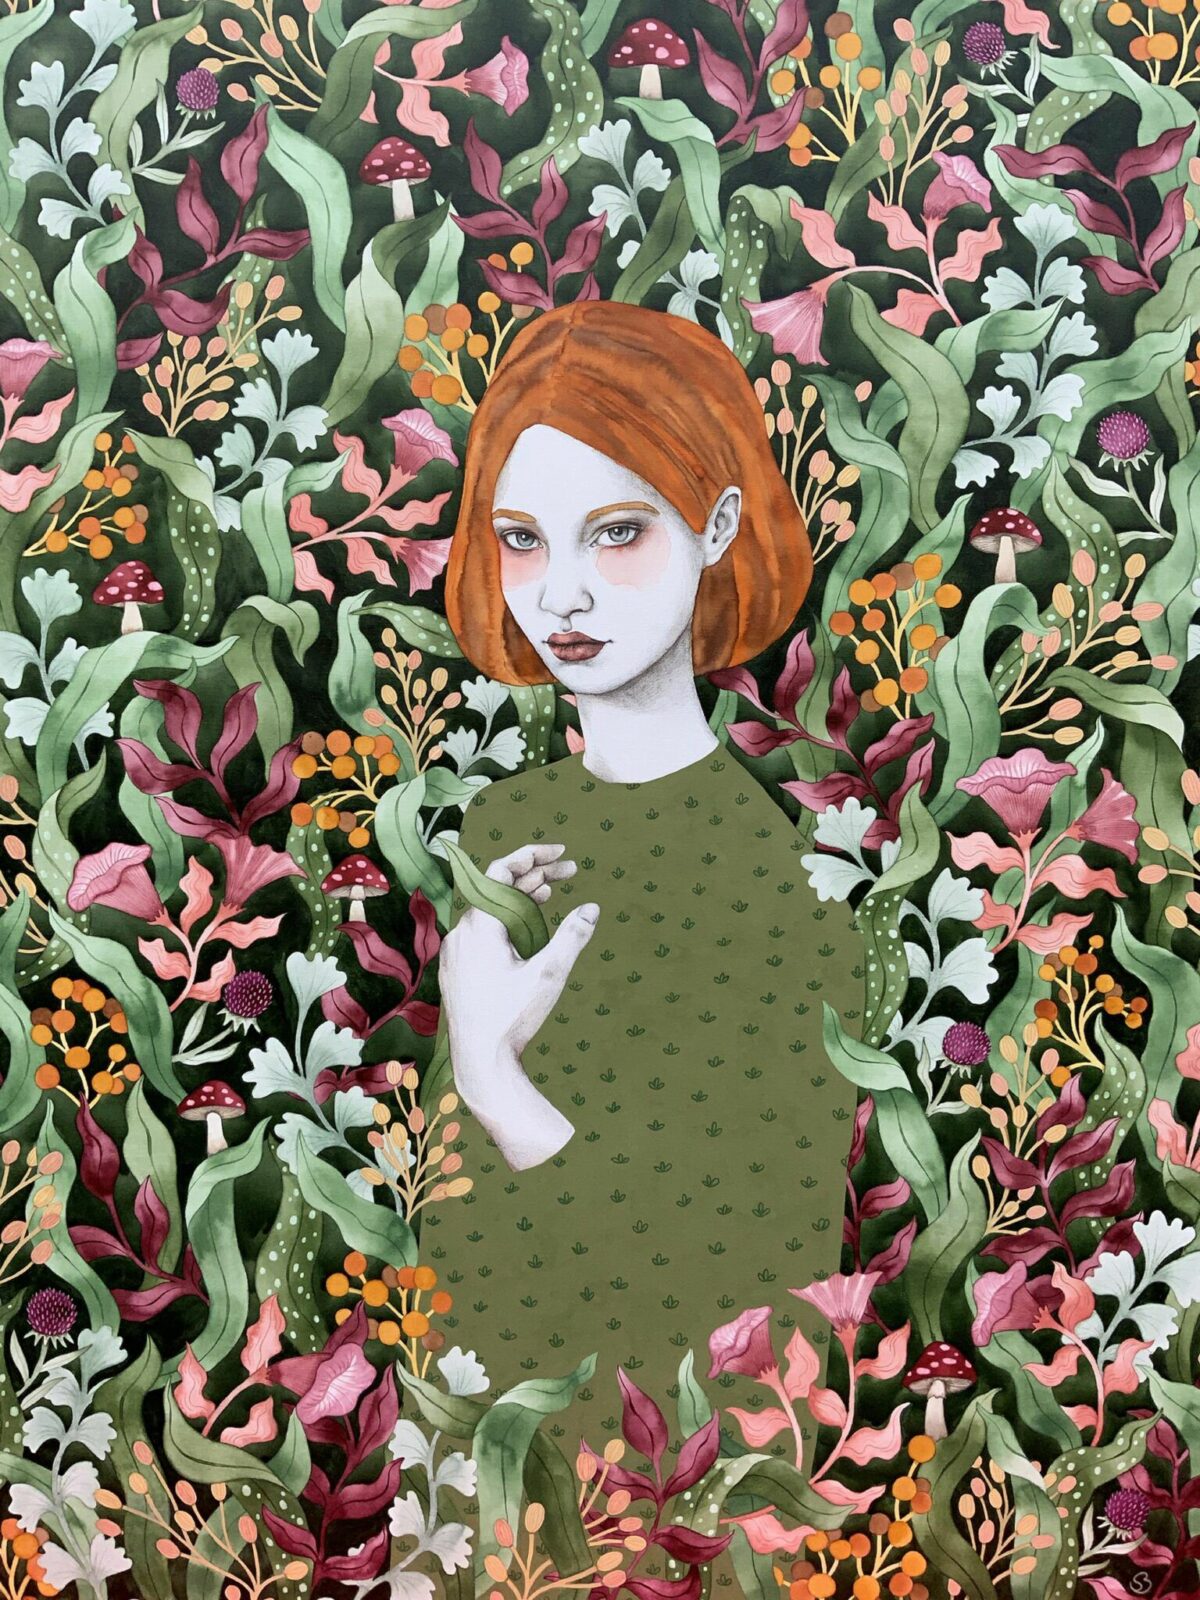 Gorgeous Female Portraits Decorated With Abstract And Floral Patterns By Sofia Bonati 13